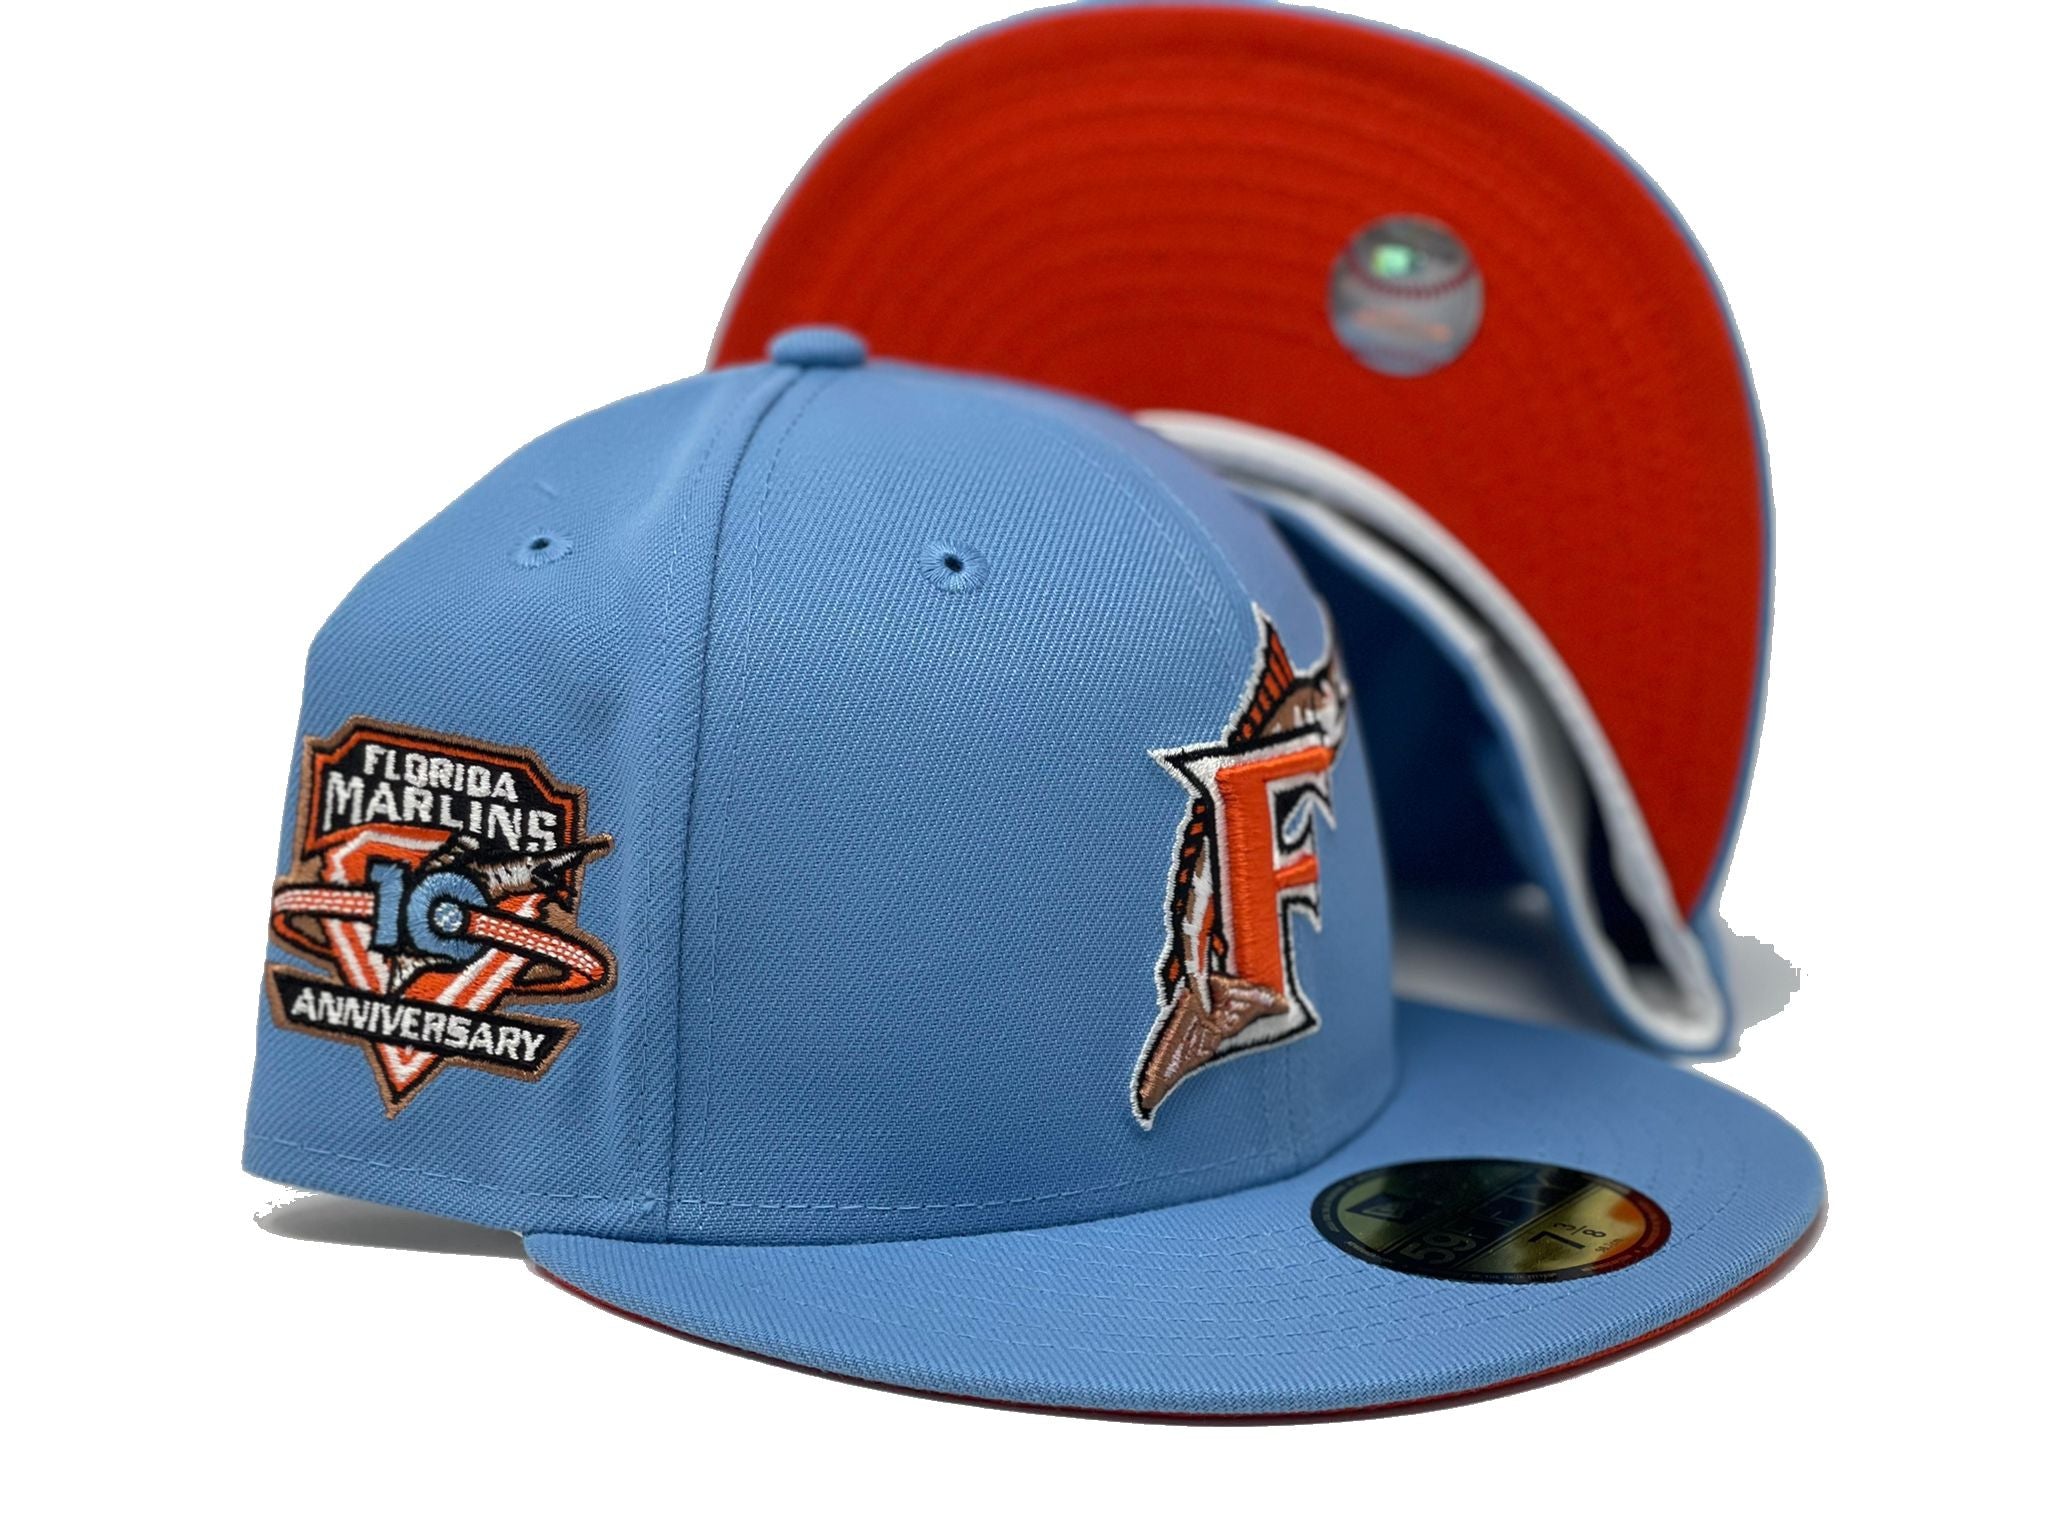 Florida Marlins New Era Fitted Hat 7 1/2 59/50 10 Year Anniversary Patch